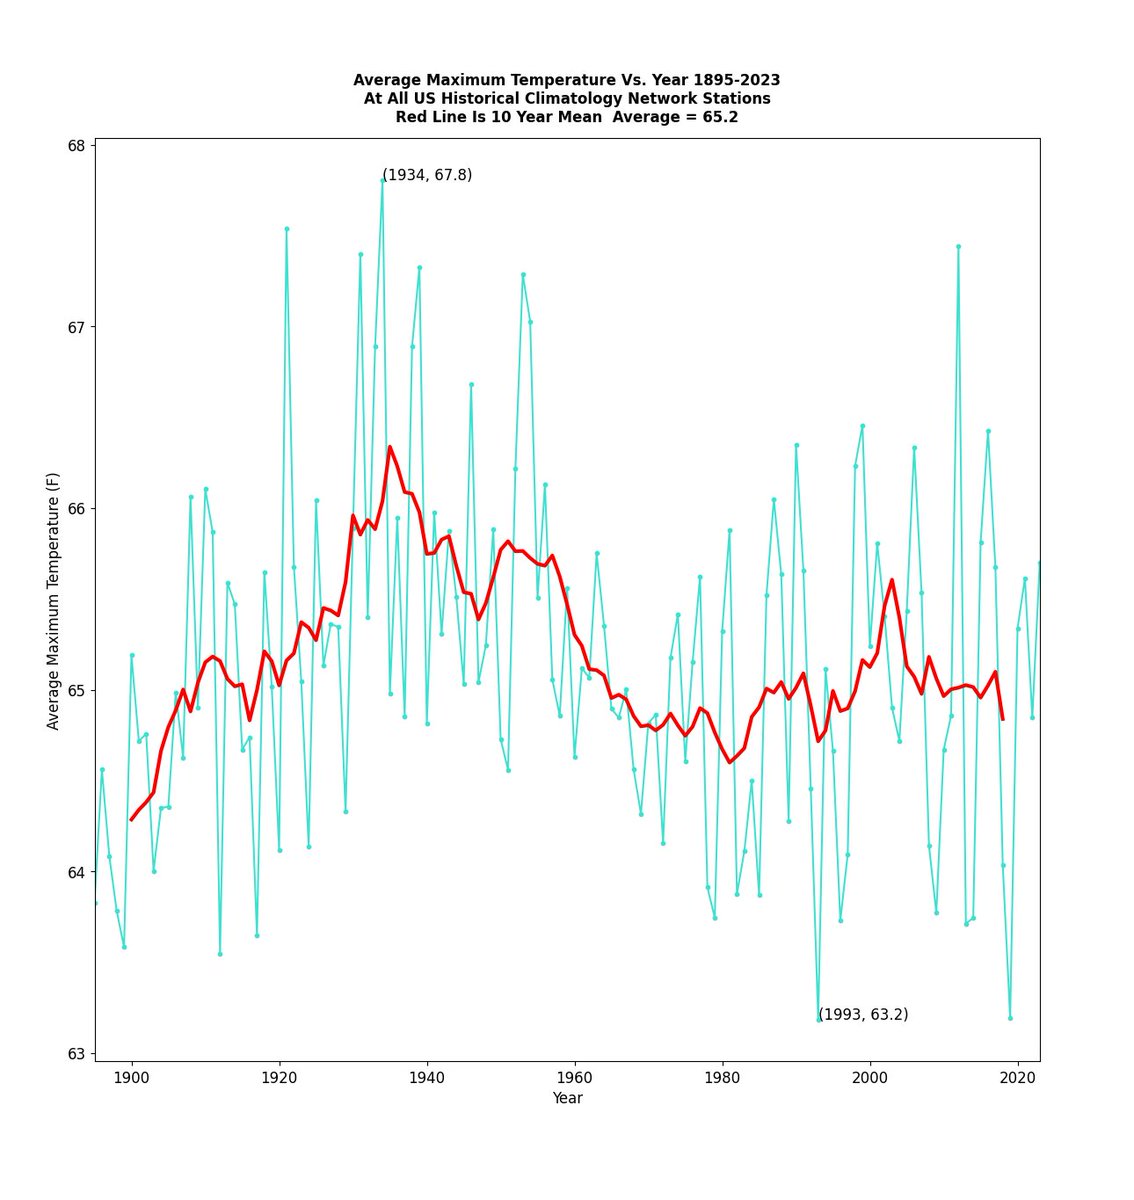 Ridiculous #ClimateScam propaganda. Daily maximum temperatures in the US have dropped sharply since the extremely hot 1930s.